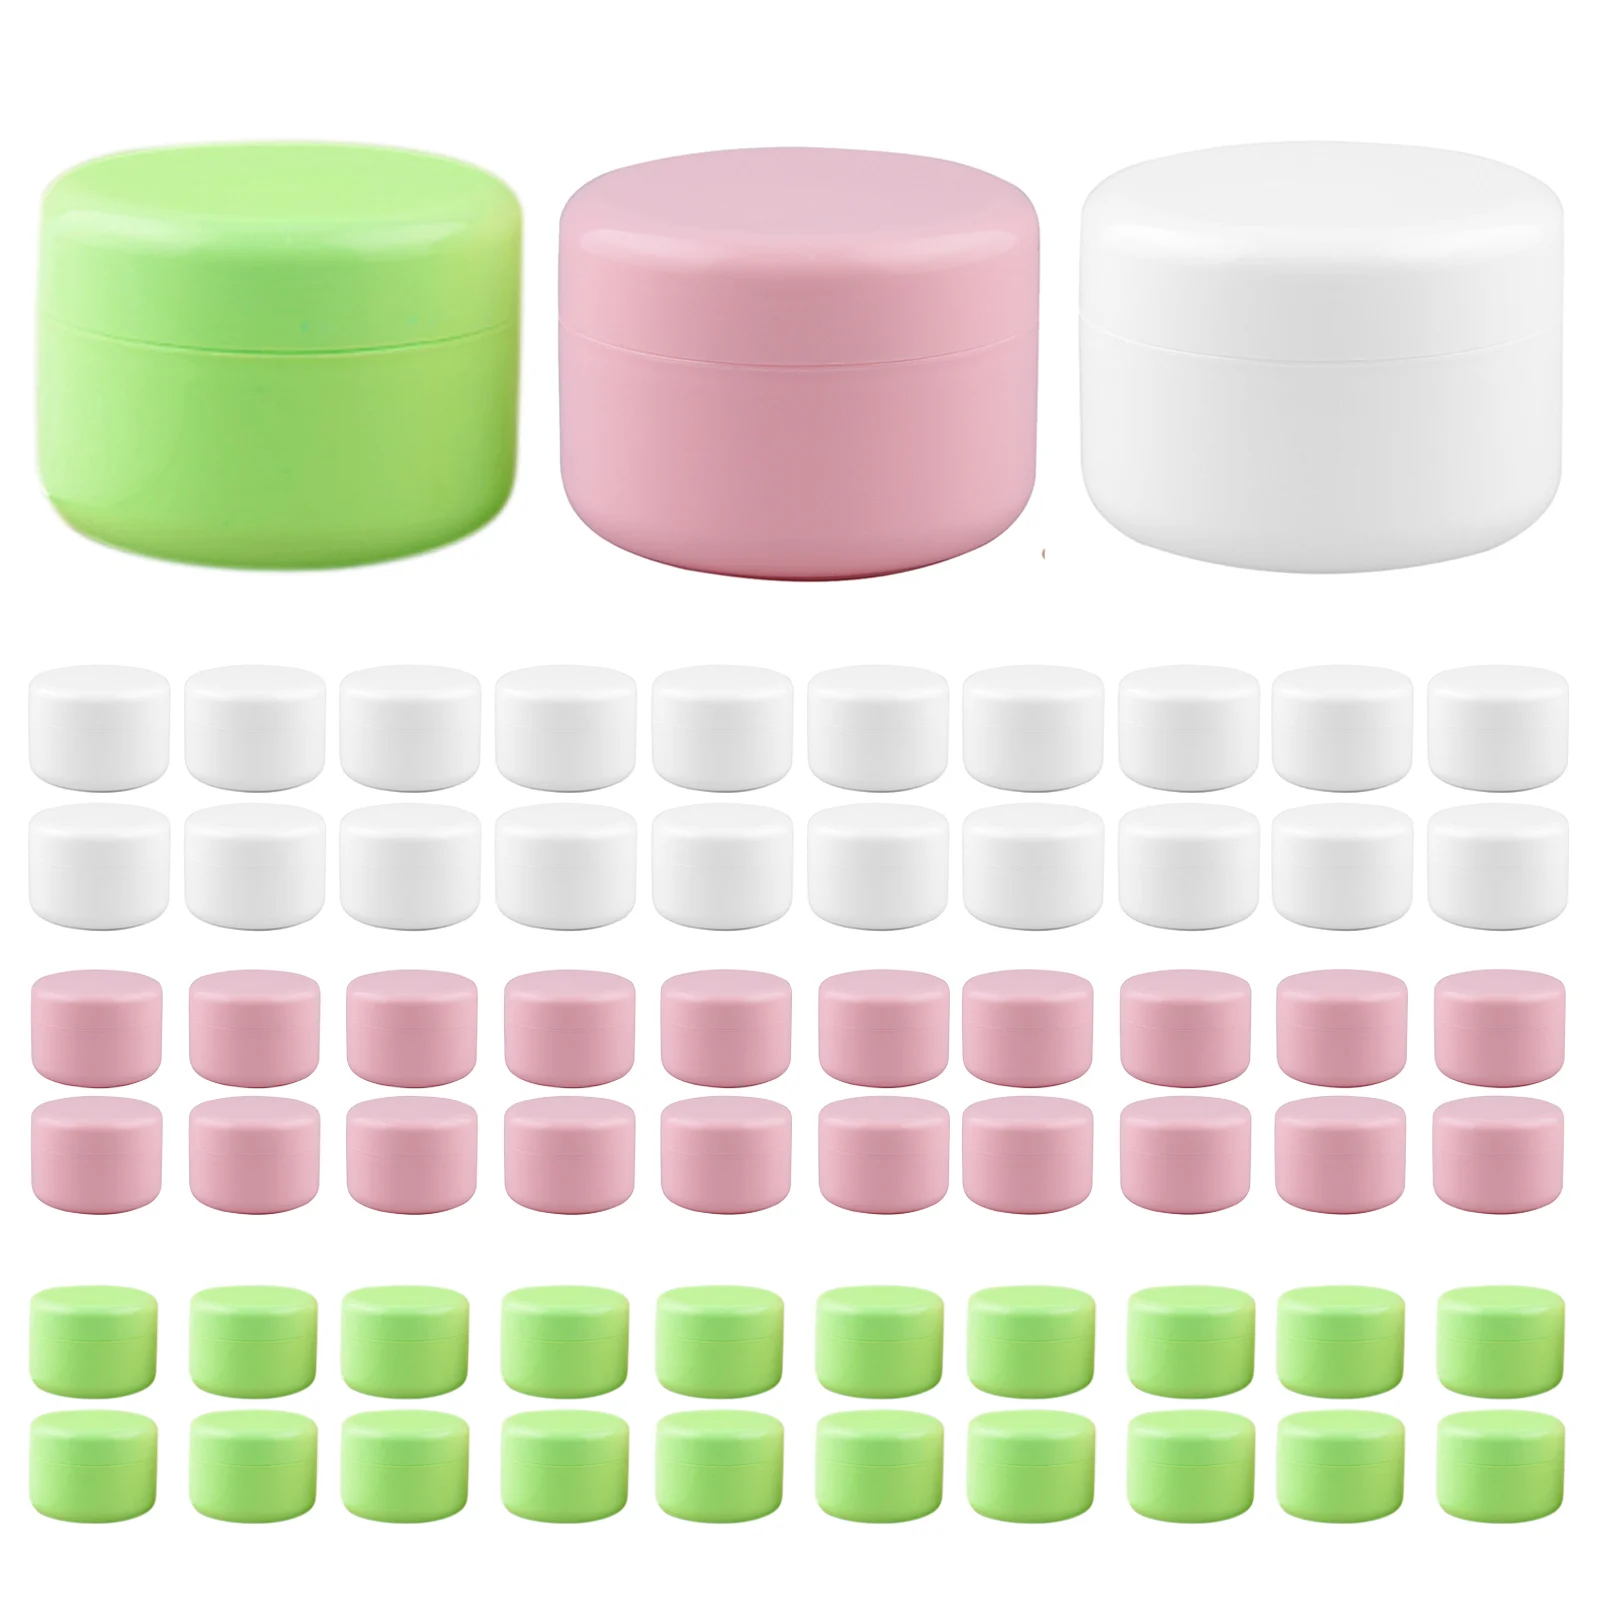 20PCS Cosmetic Containers 20g Plastic Empty Creams Lotions Toners Lip Gloss Storage Jar Boxes for Home Travel Business Trip hawkwind business trip 1 cd